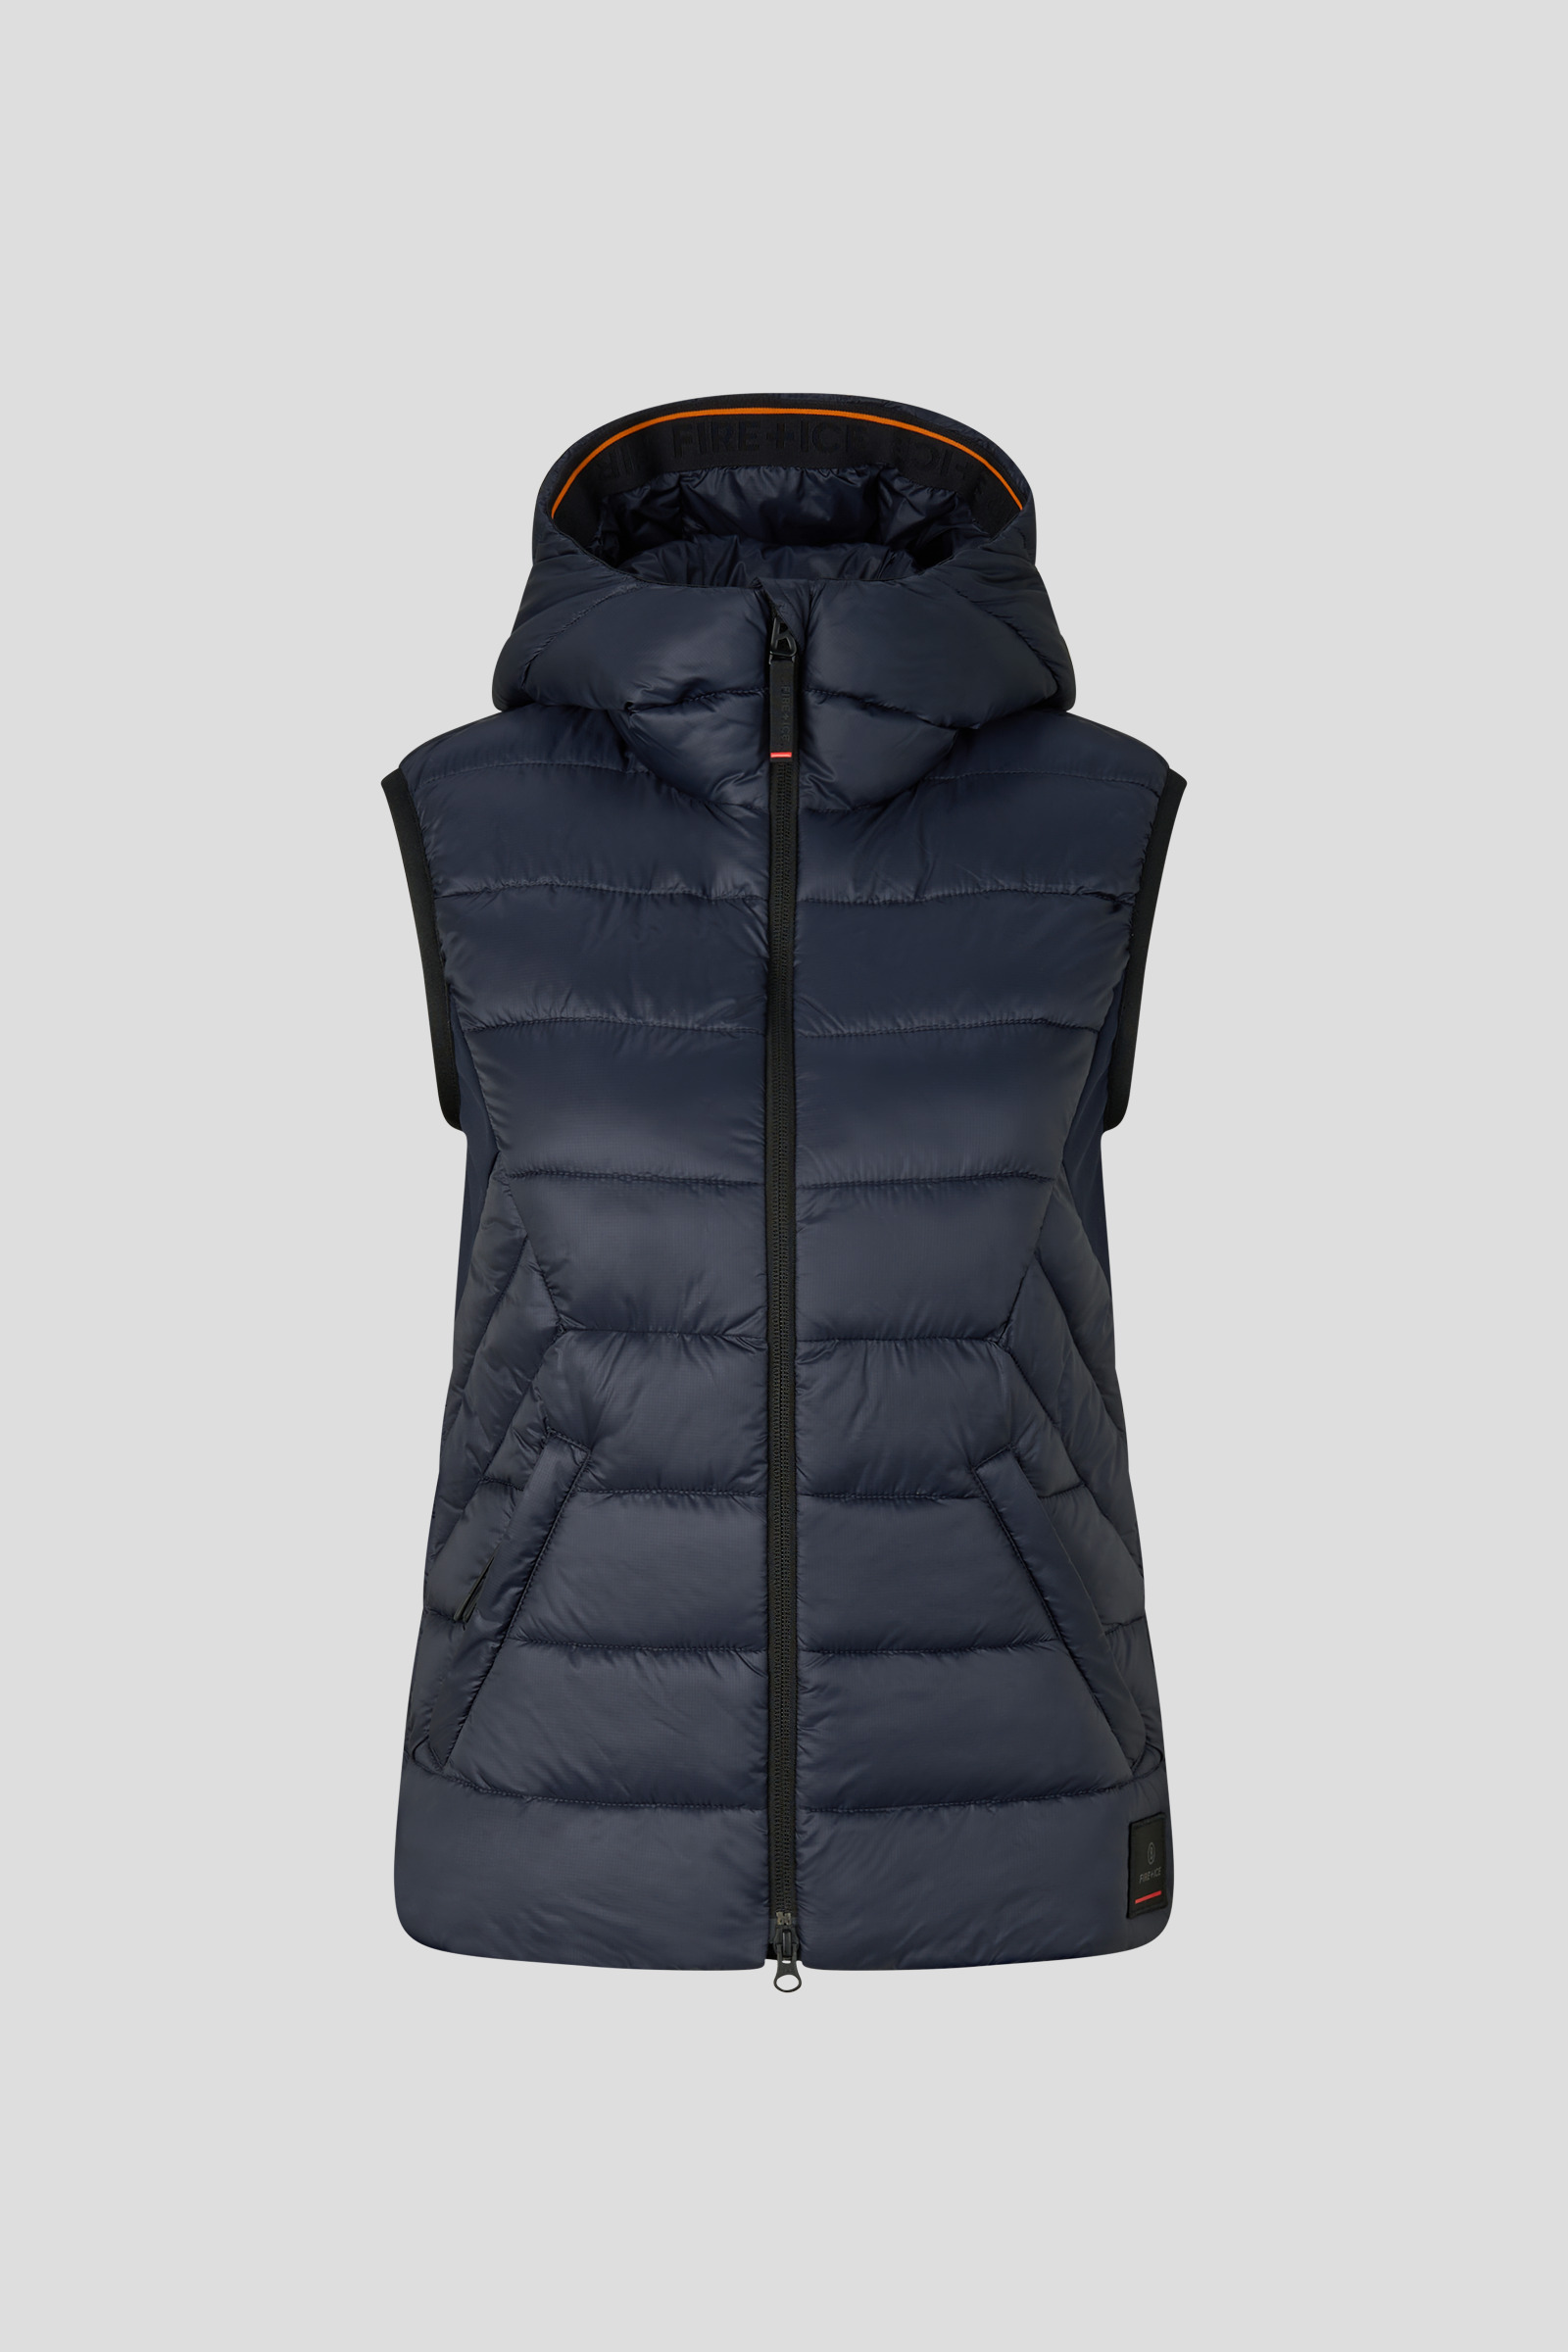 gilet FIRE+ICE for Karyn women Quilted